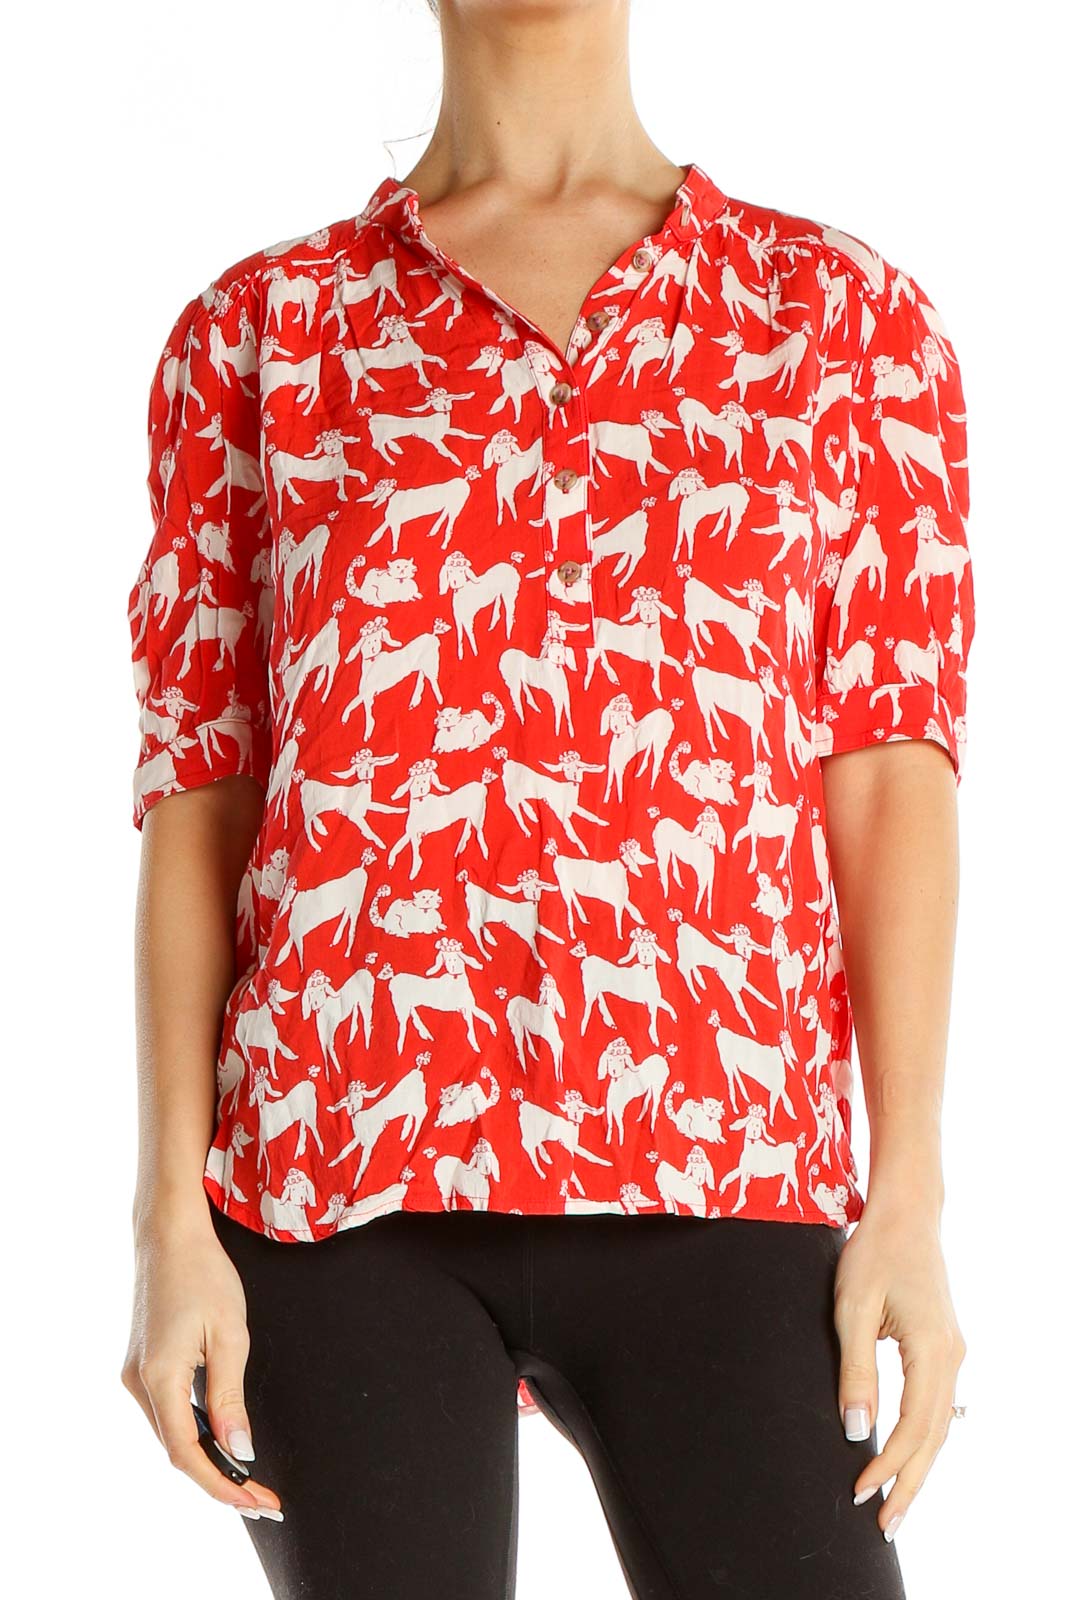 Red Printed Casual Top Front